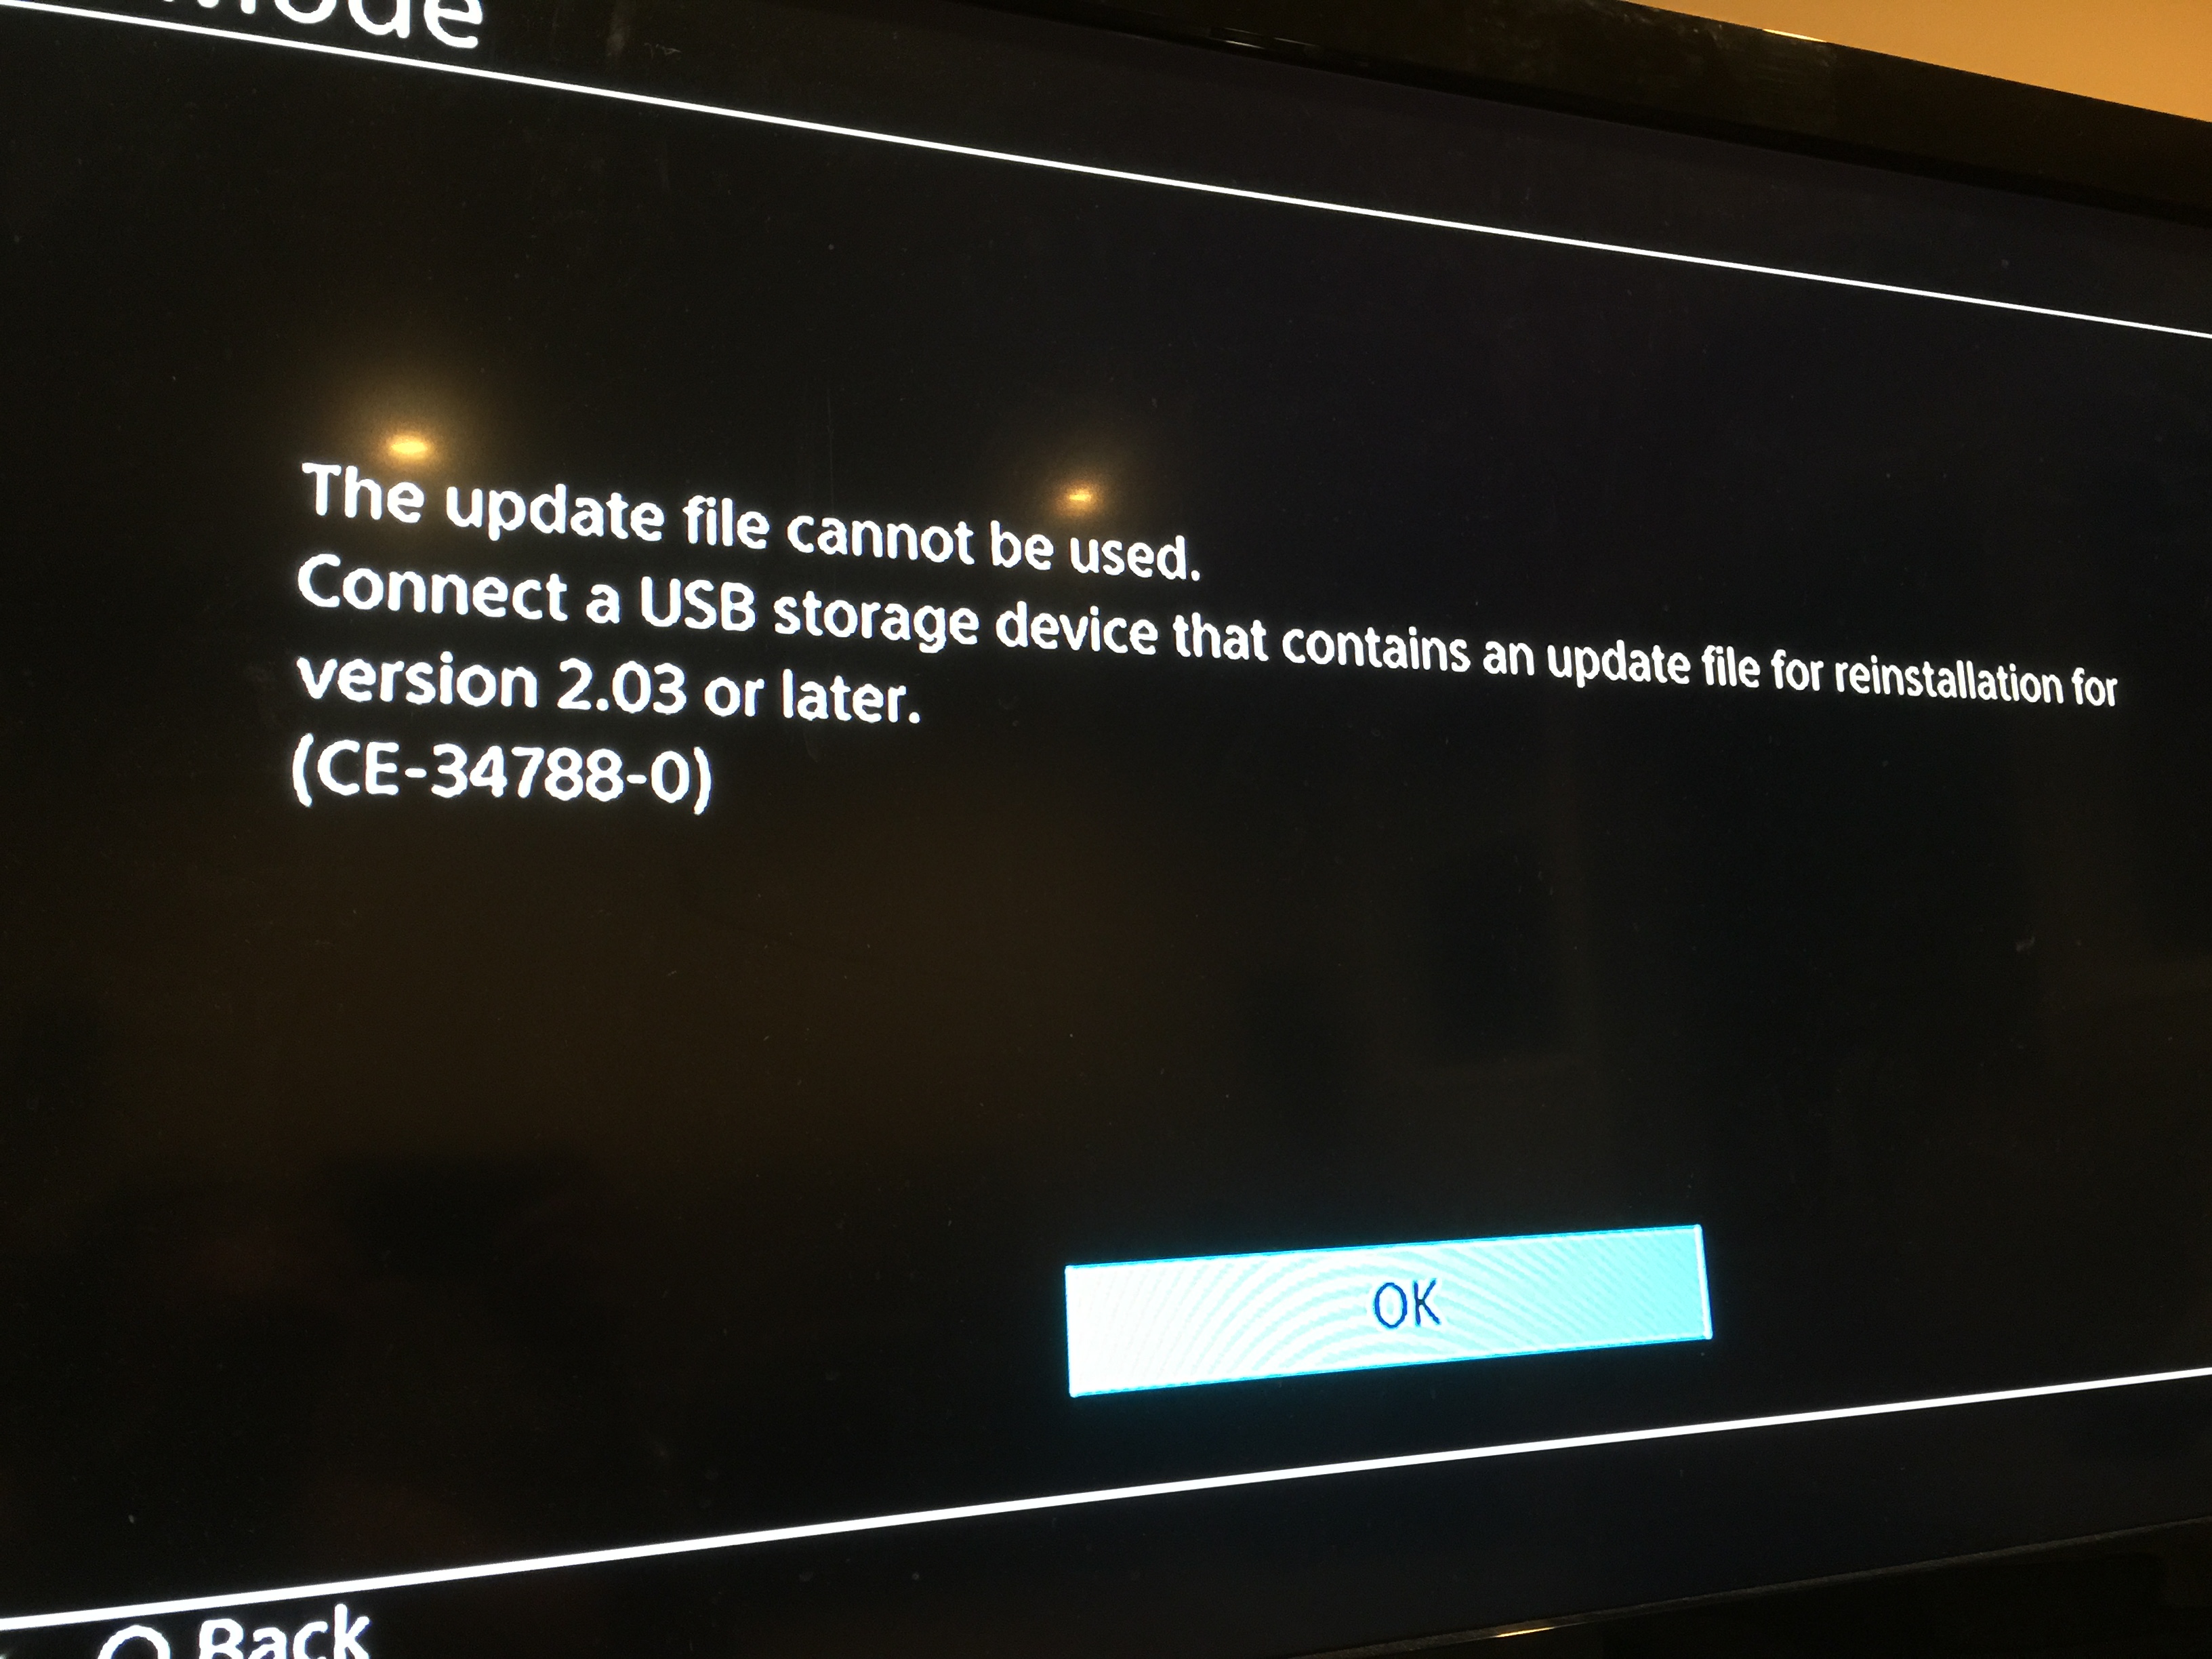 ps4 update file for reinstallation version 7.55